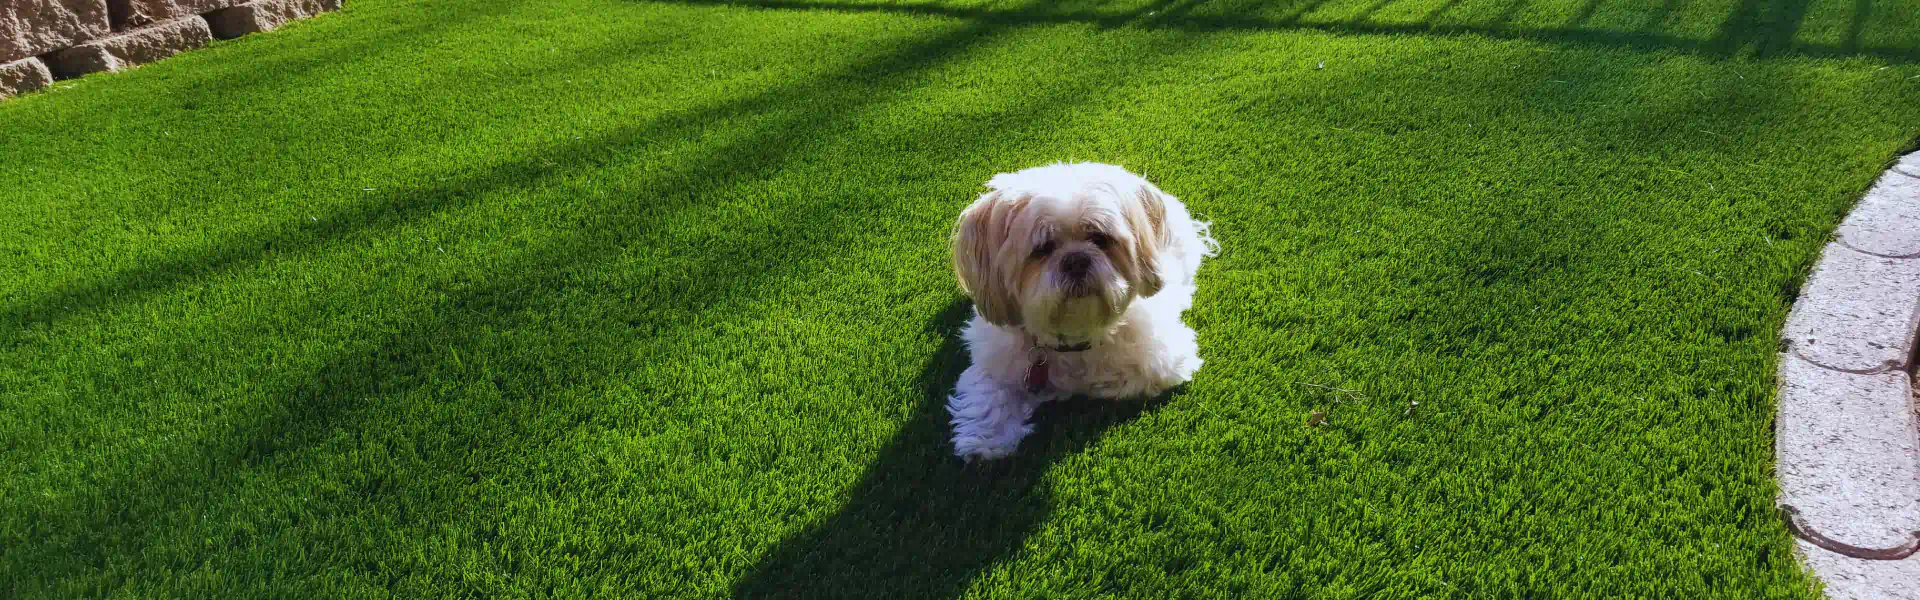 hero dog on exterior synthetic grass ivins ut